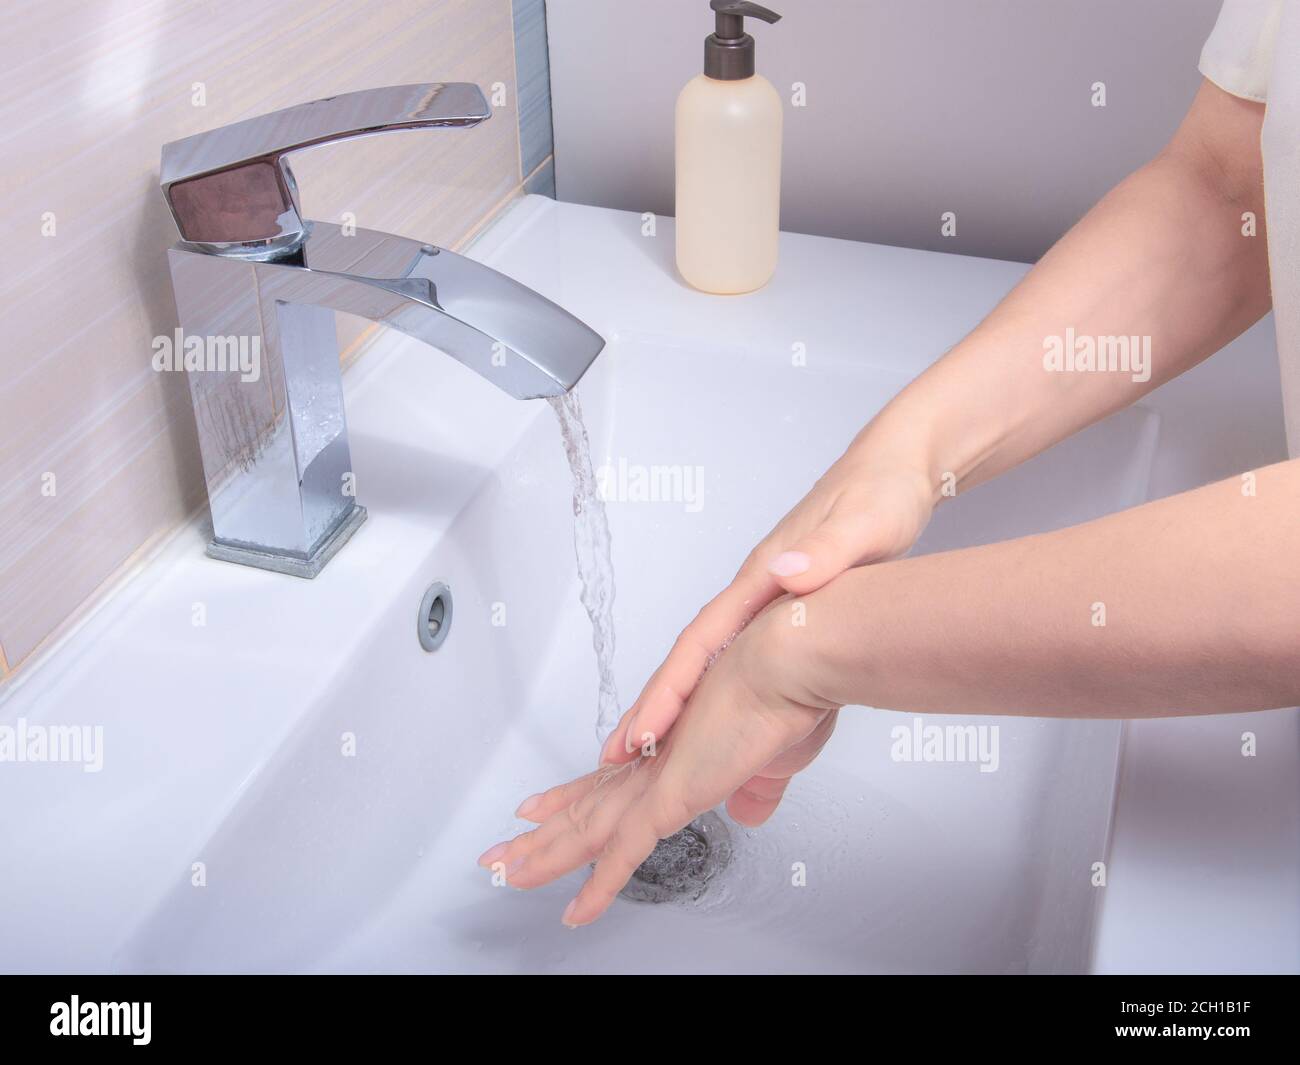 Coronavirus pandemic prevention wash hands with soap warm water , rubbing nails and fingers washing frequently or using hand sanitizer gel. Hygiene co Stock Photo